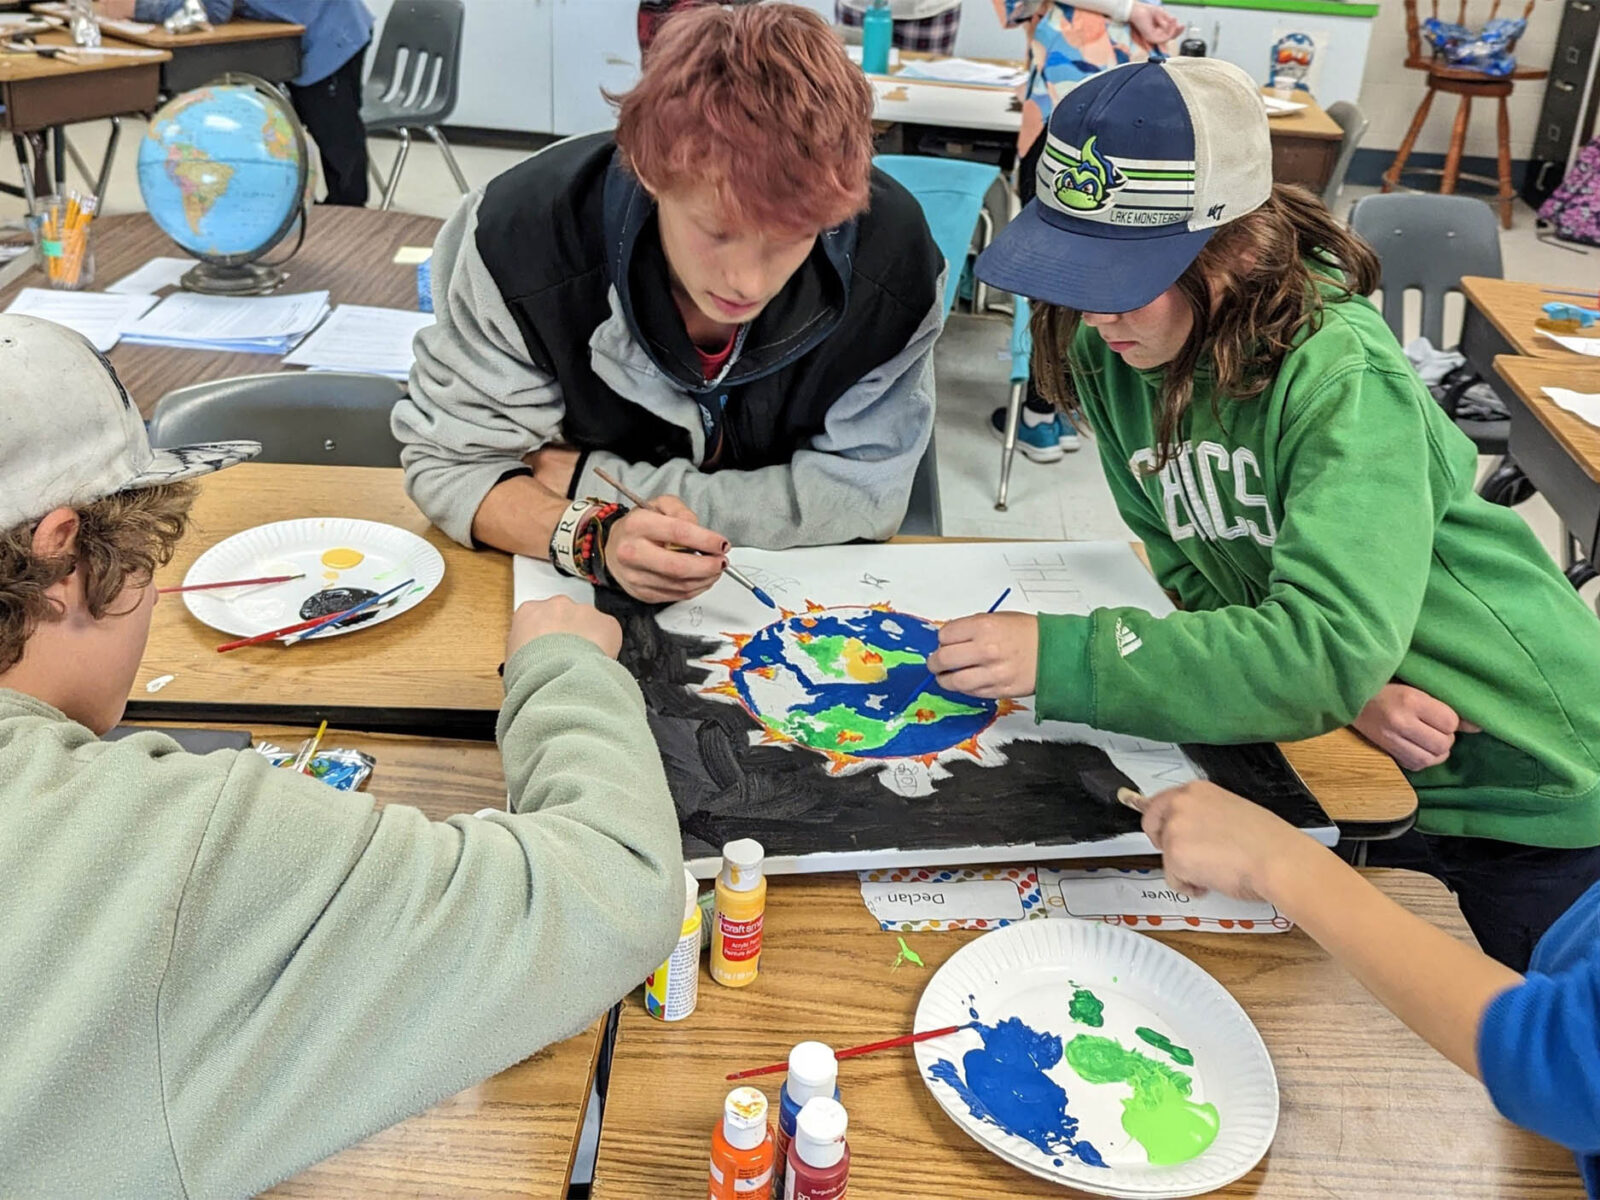 younger students doing an art project